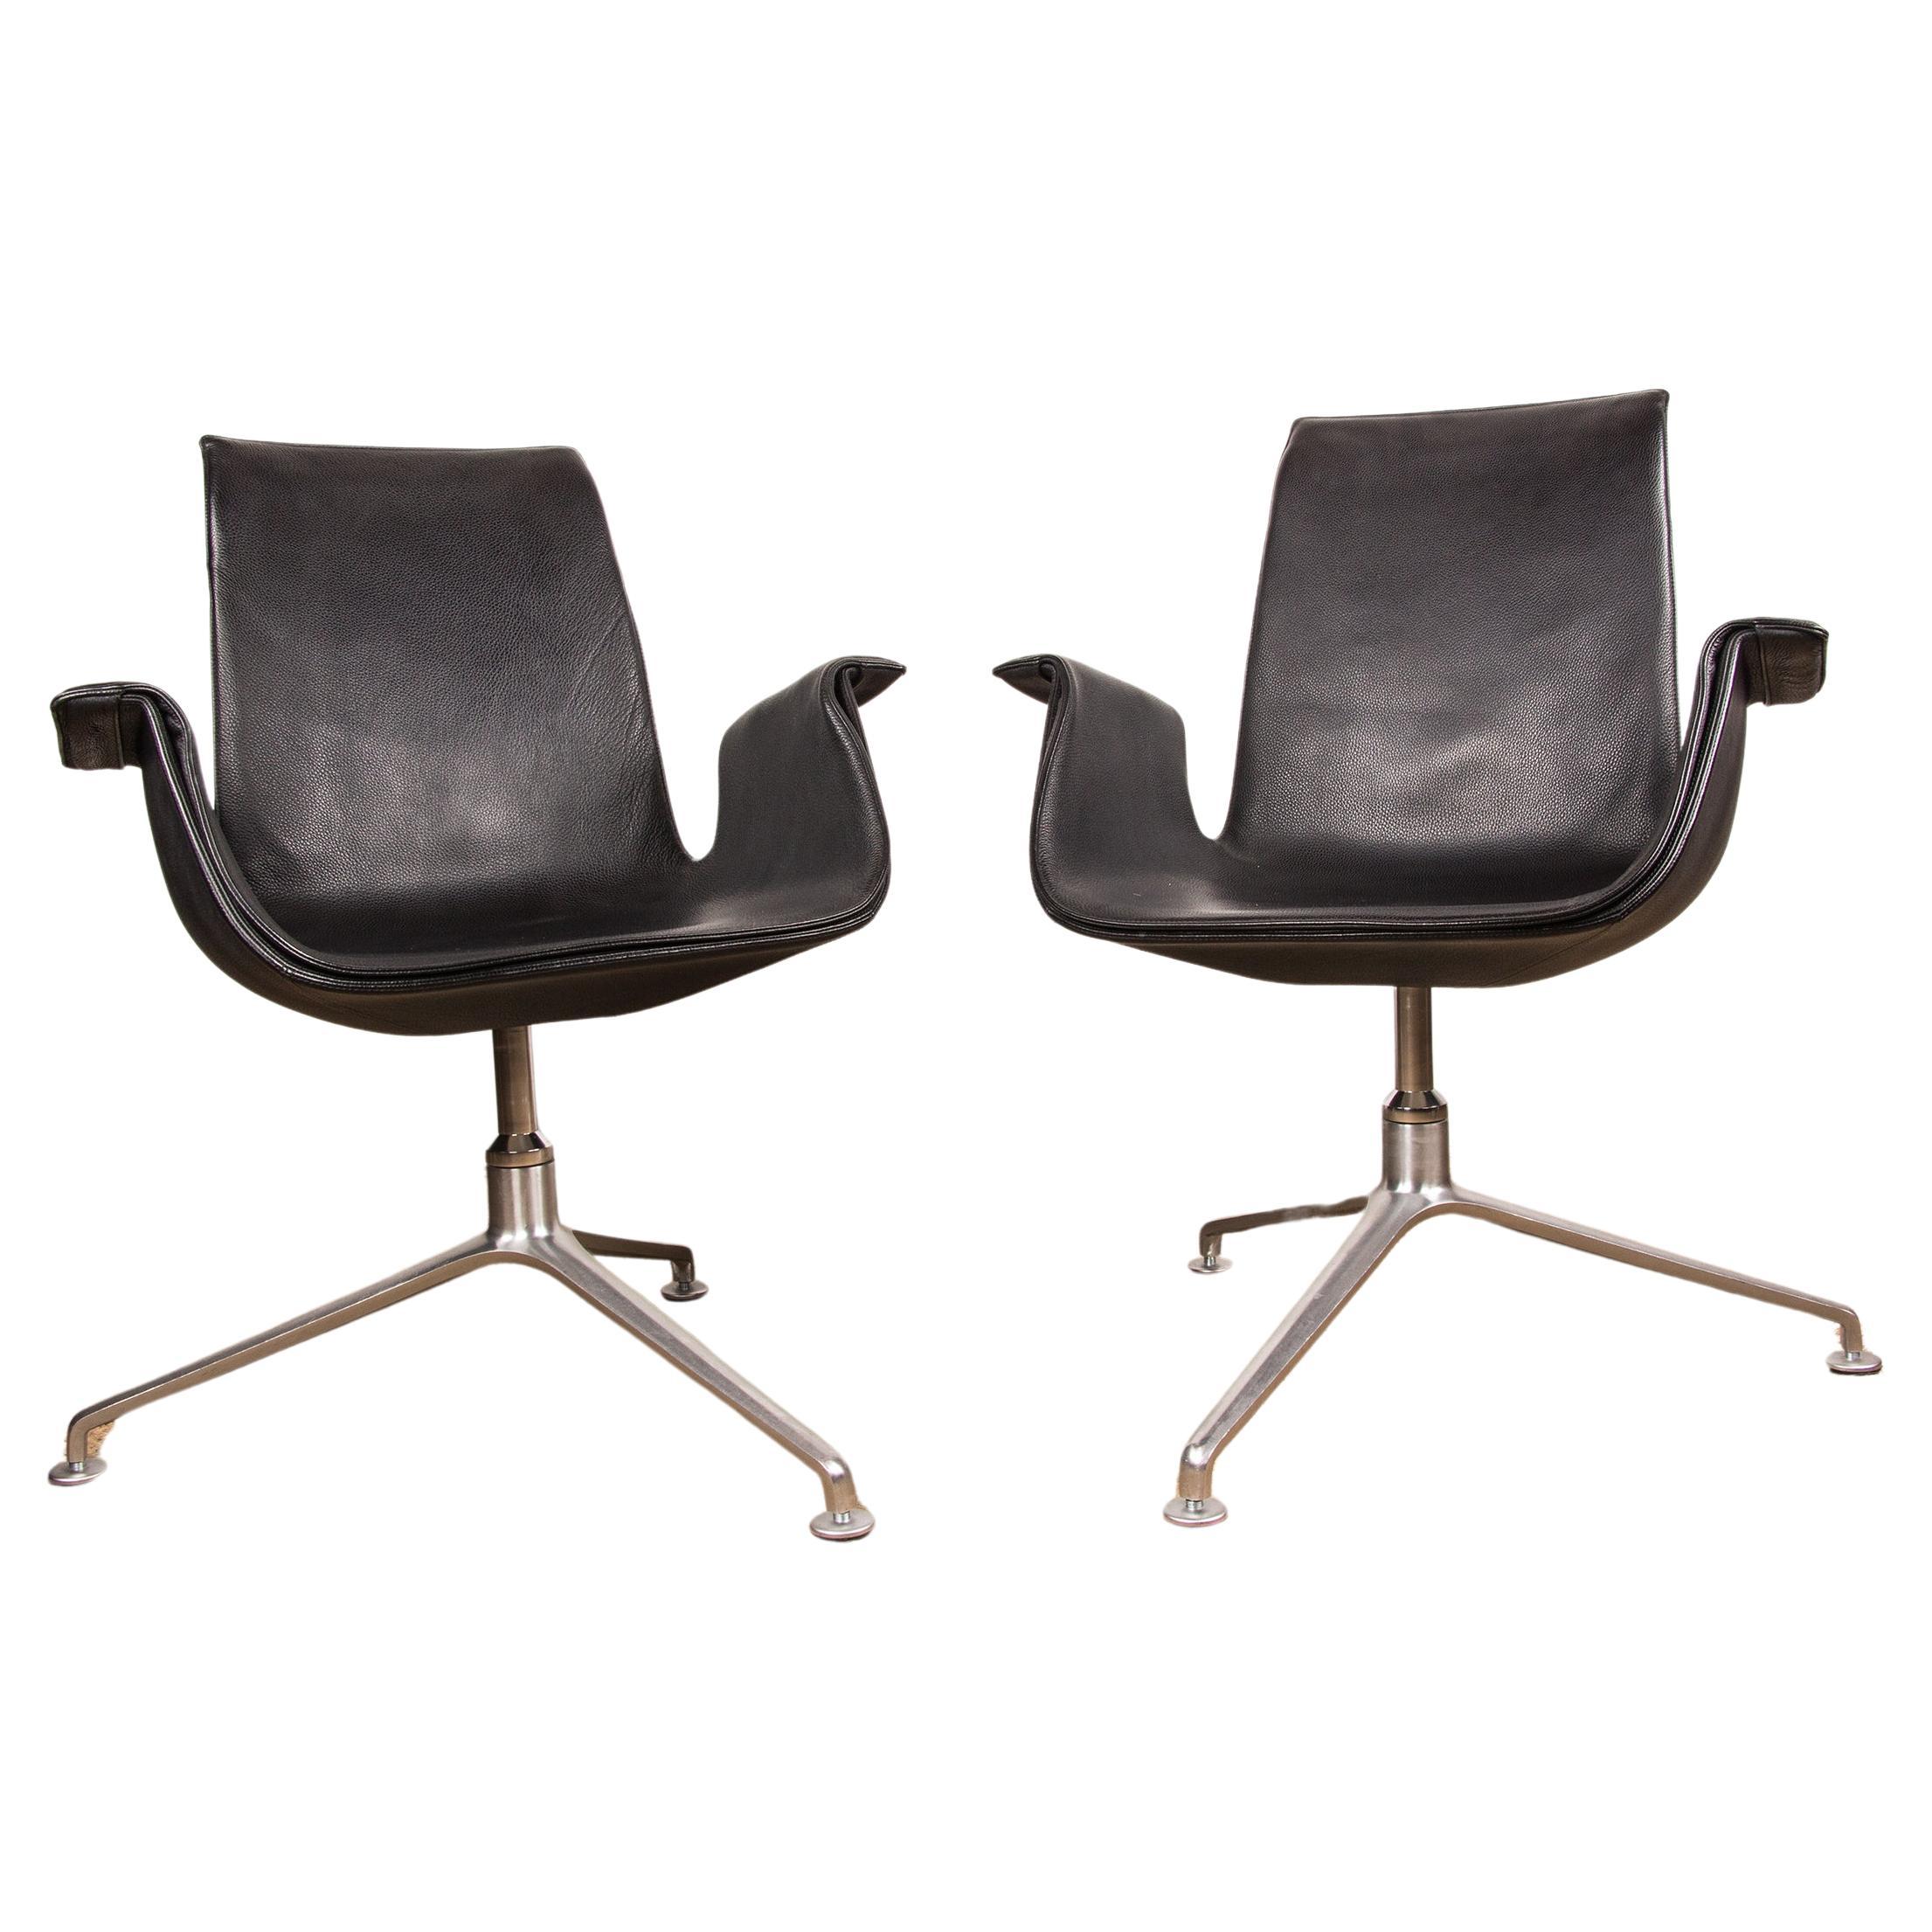 2 Danish deskchairs, Leather and steel, “Tulip chair” by Fabricius & Kalsthom. For Sale